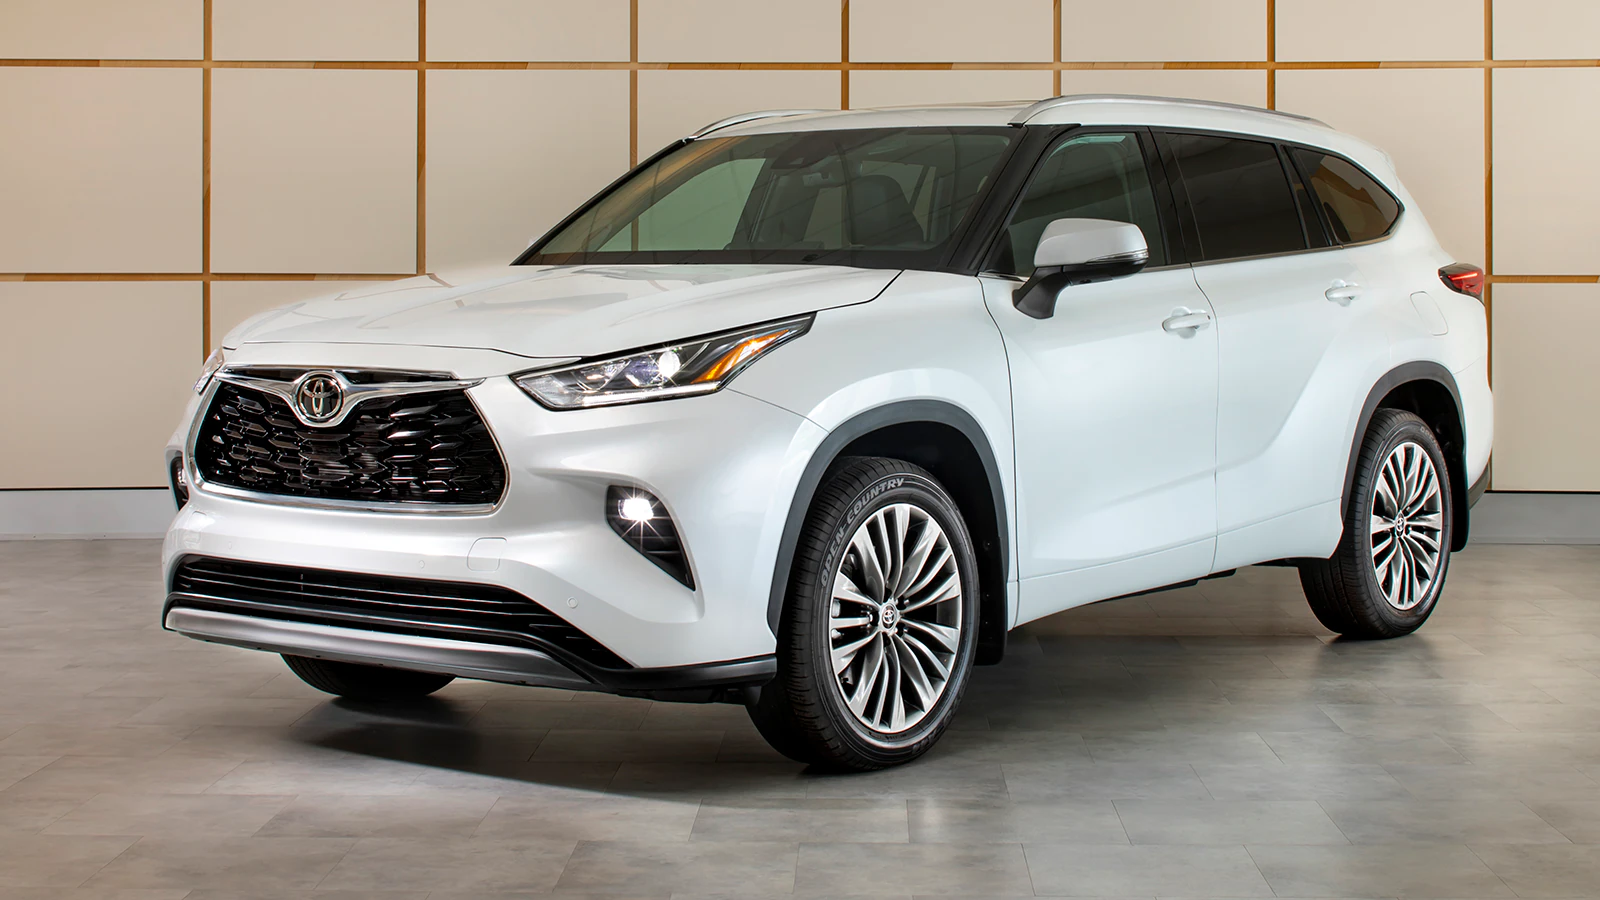 2023 Toyota Highlander Revs Up Driving With New Turbocharged Engine